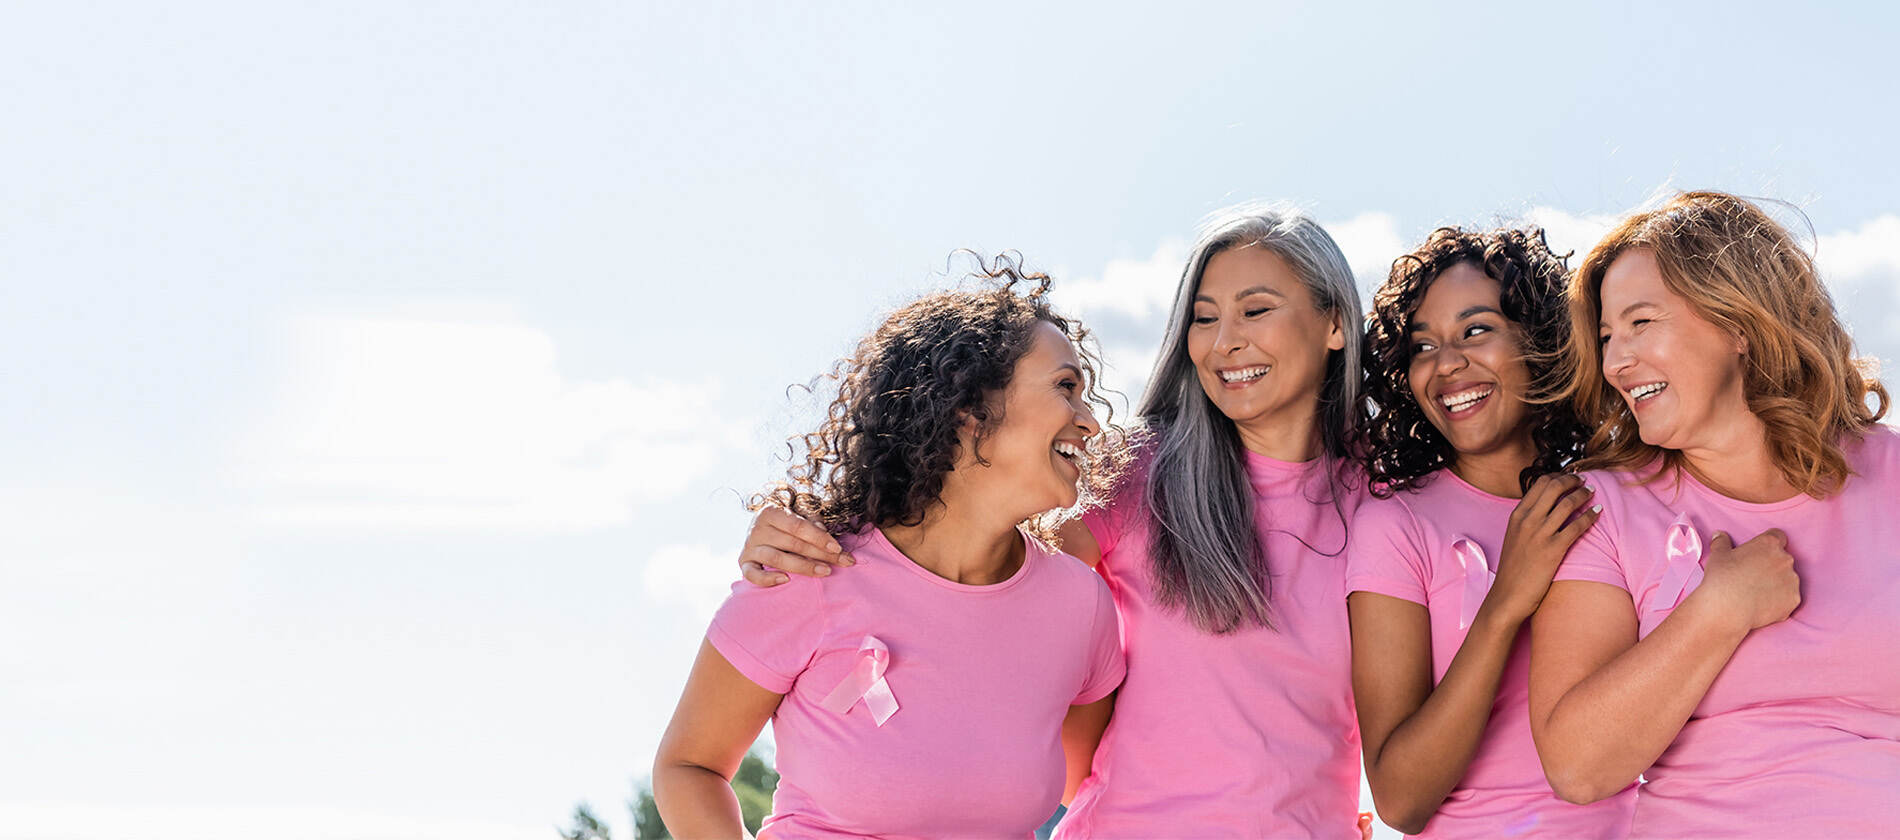 Four women smiling at each other wearing pink shirts